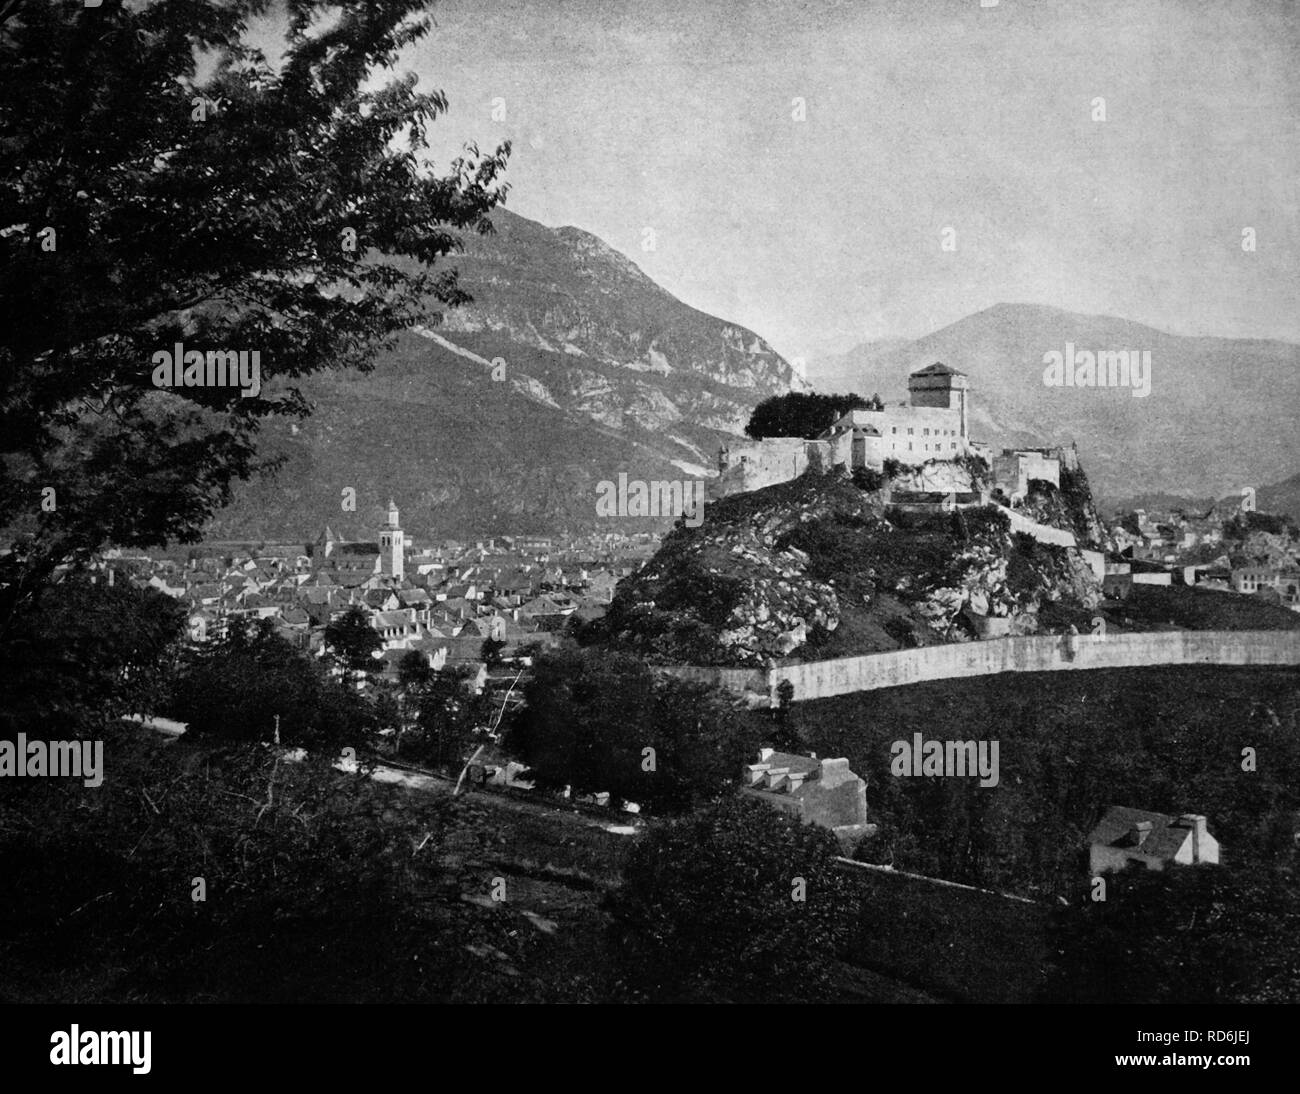 Lourdes france Black and White Stock Photos & Images - Alamy